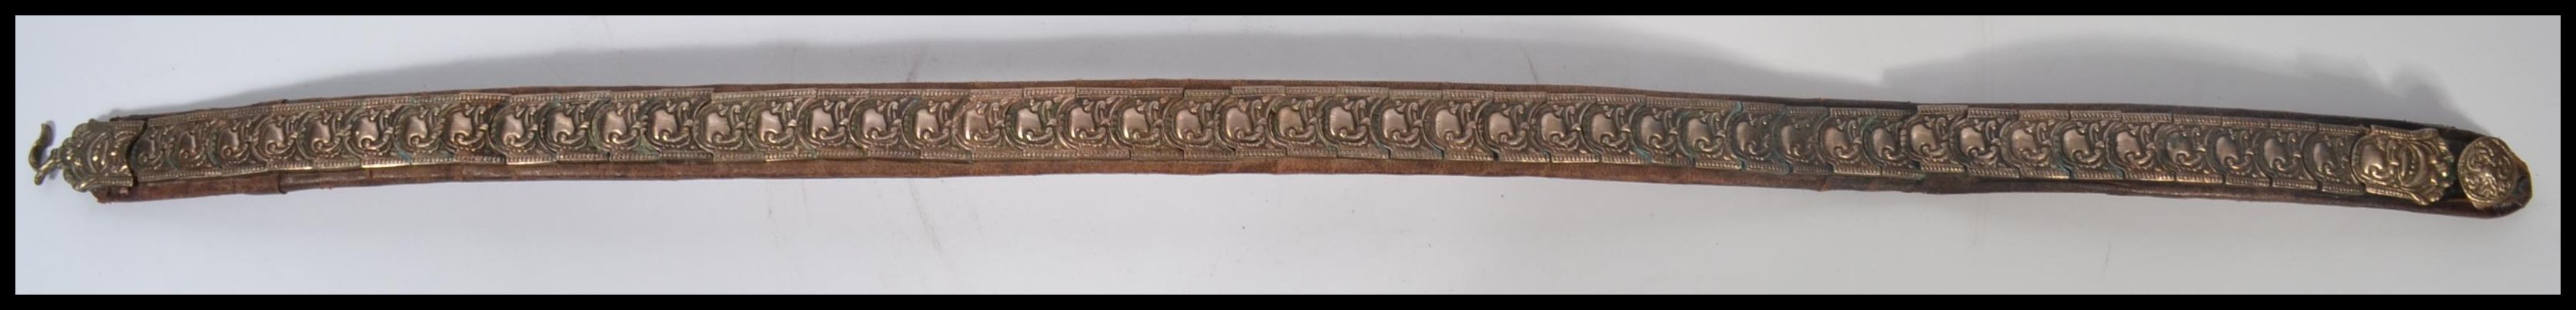 An unusual white metal and leather belt, believed